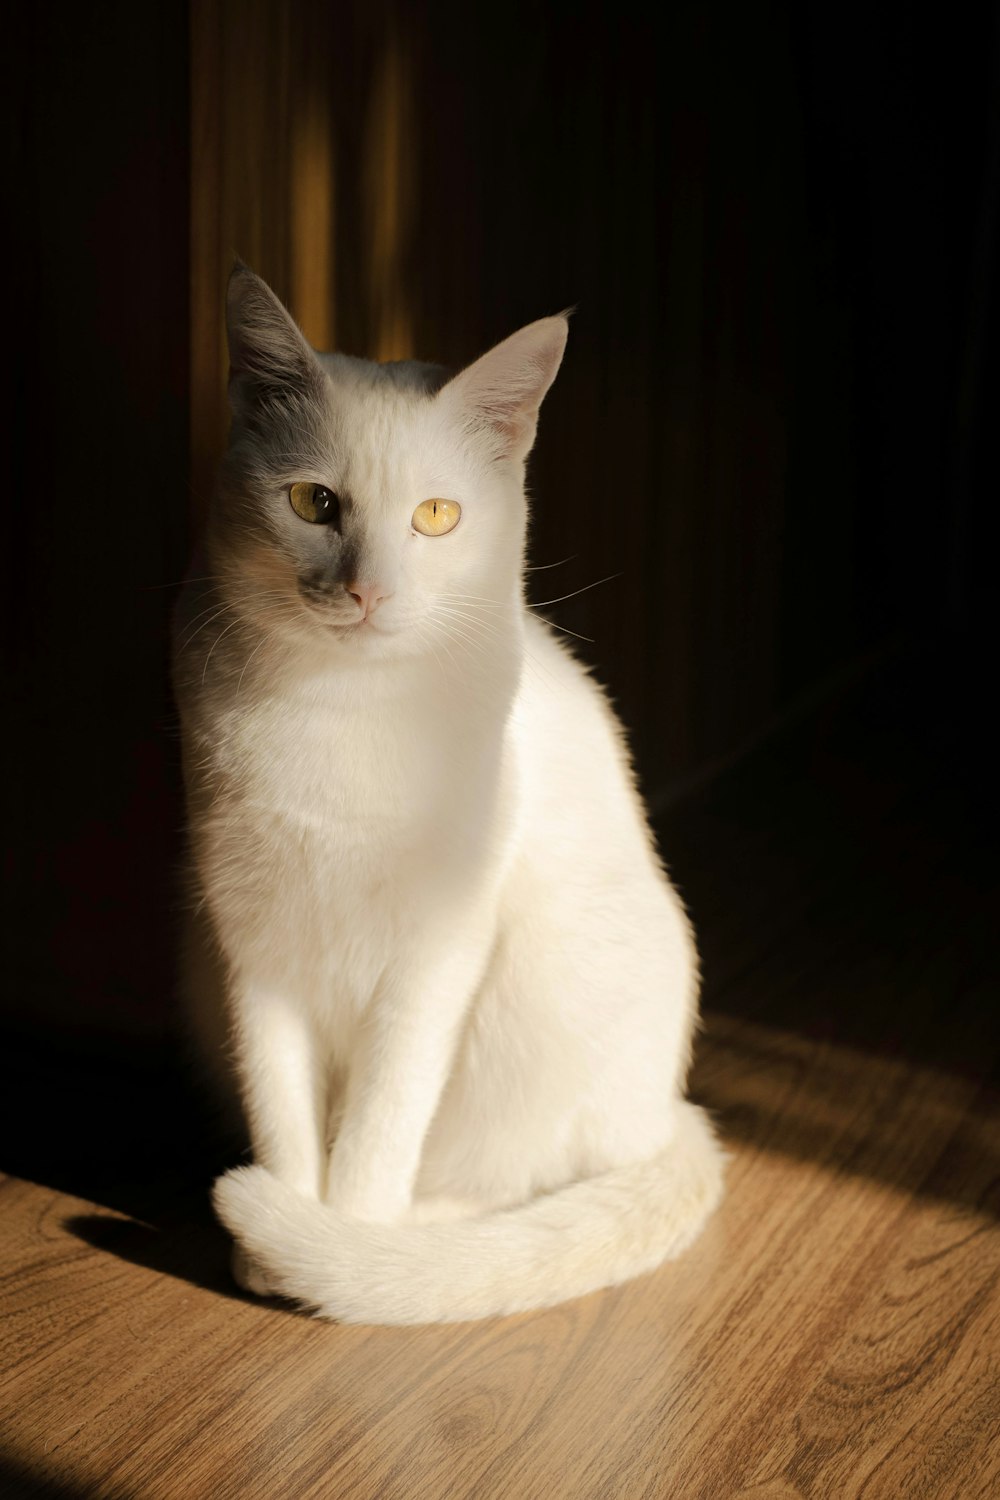 a white and gray cat sitting on a wooden floor